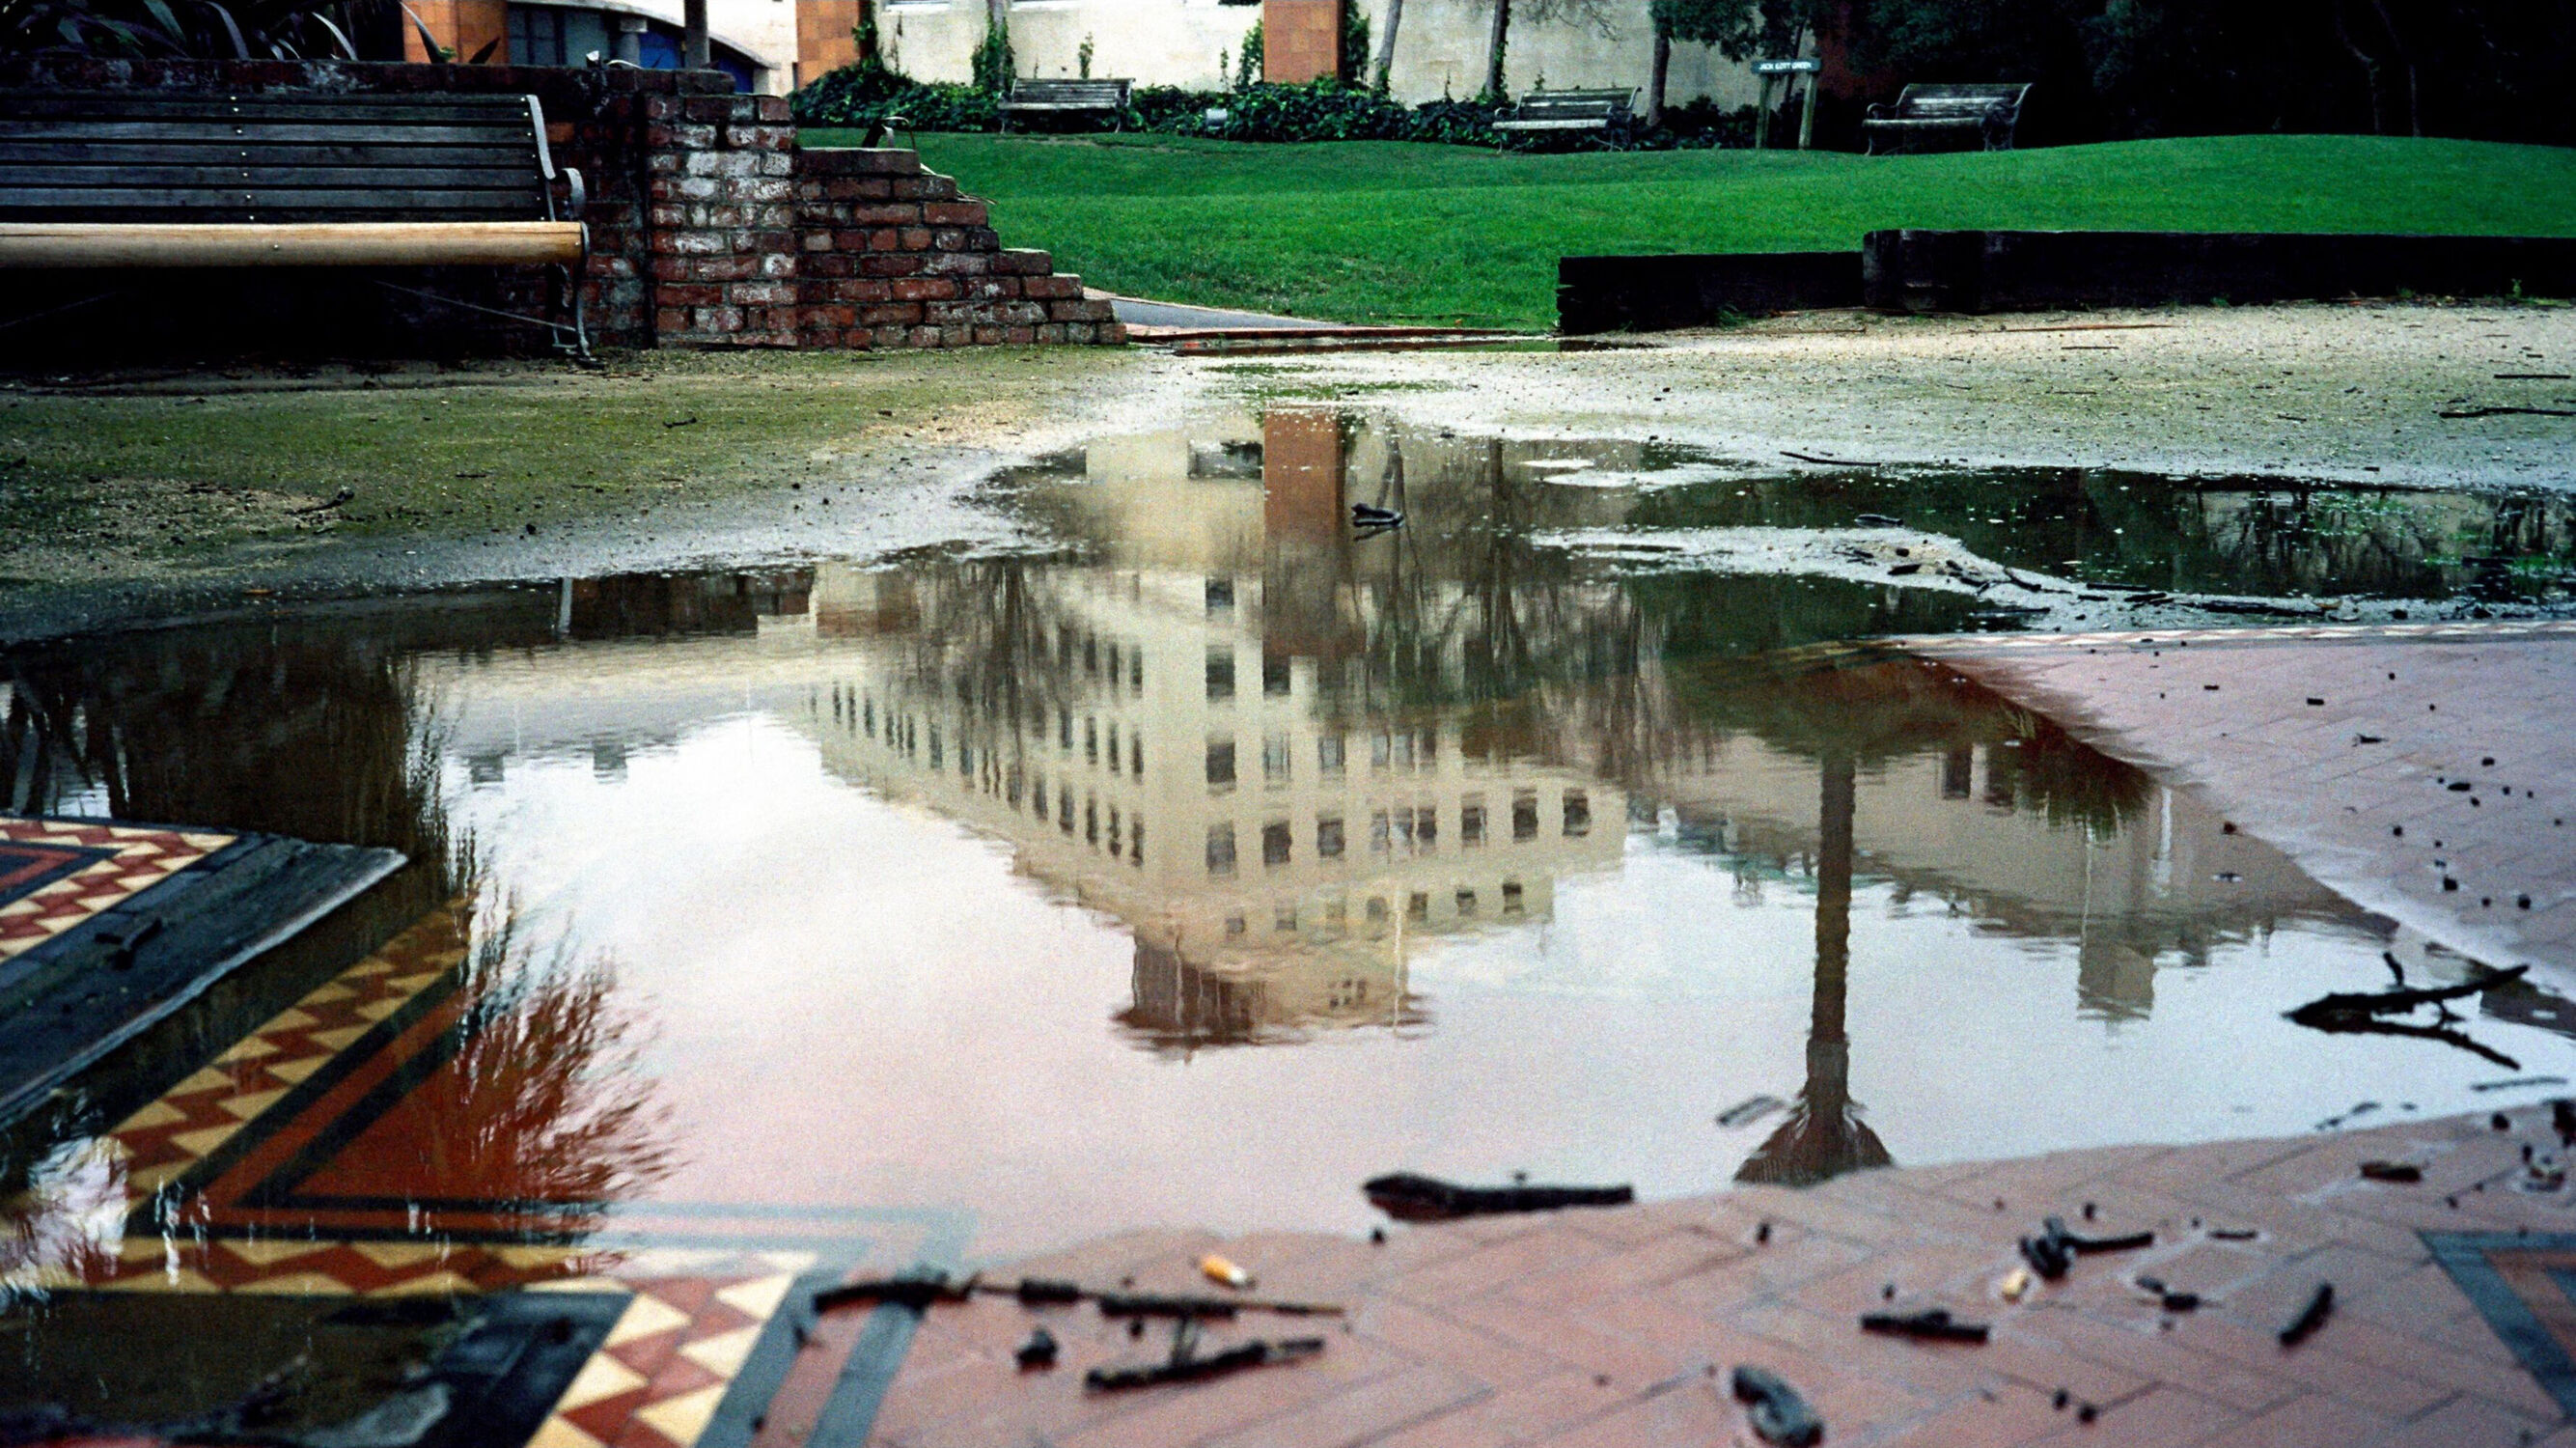 The reflection of an old building in a puddle